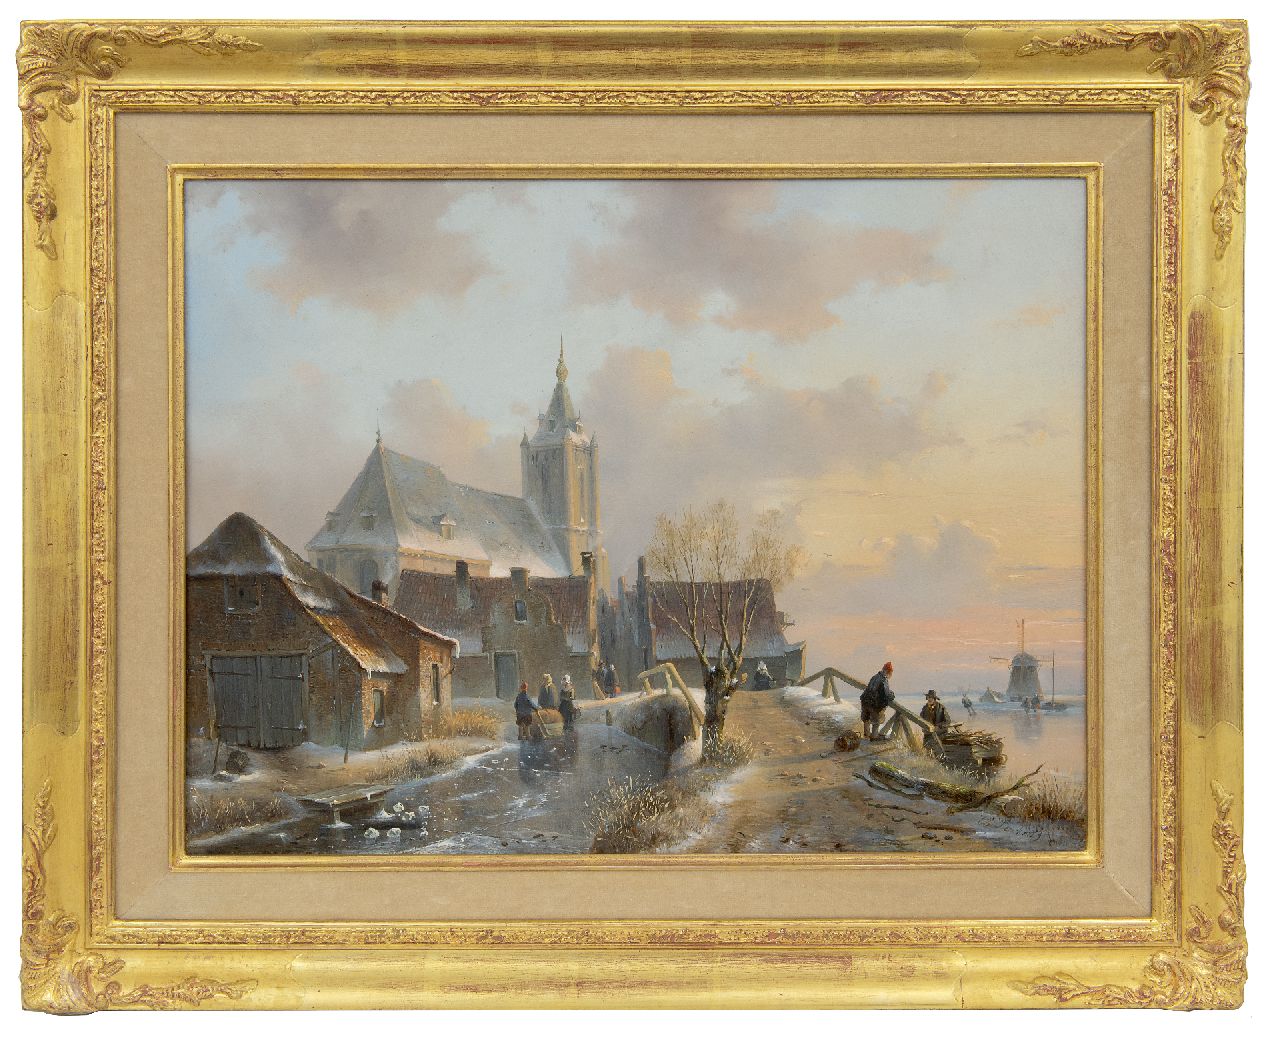 Leickert C.H.J.  | 'Charles' Henri Joseph Leickert, A snowy village view with skaters, oil on panel 37.5 x 49.7 cm, signed l.r. and painted ca. 1845